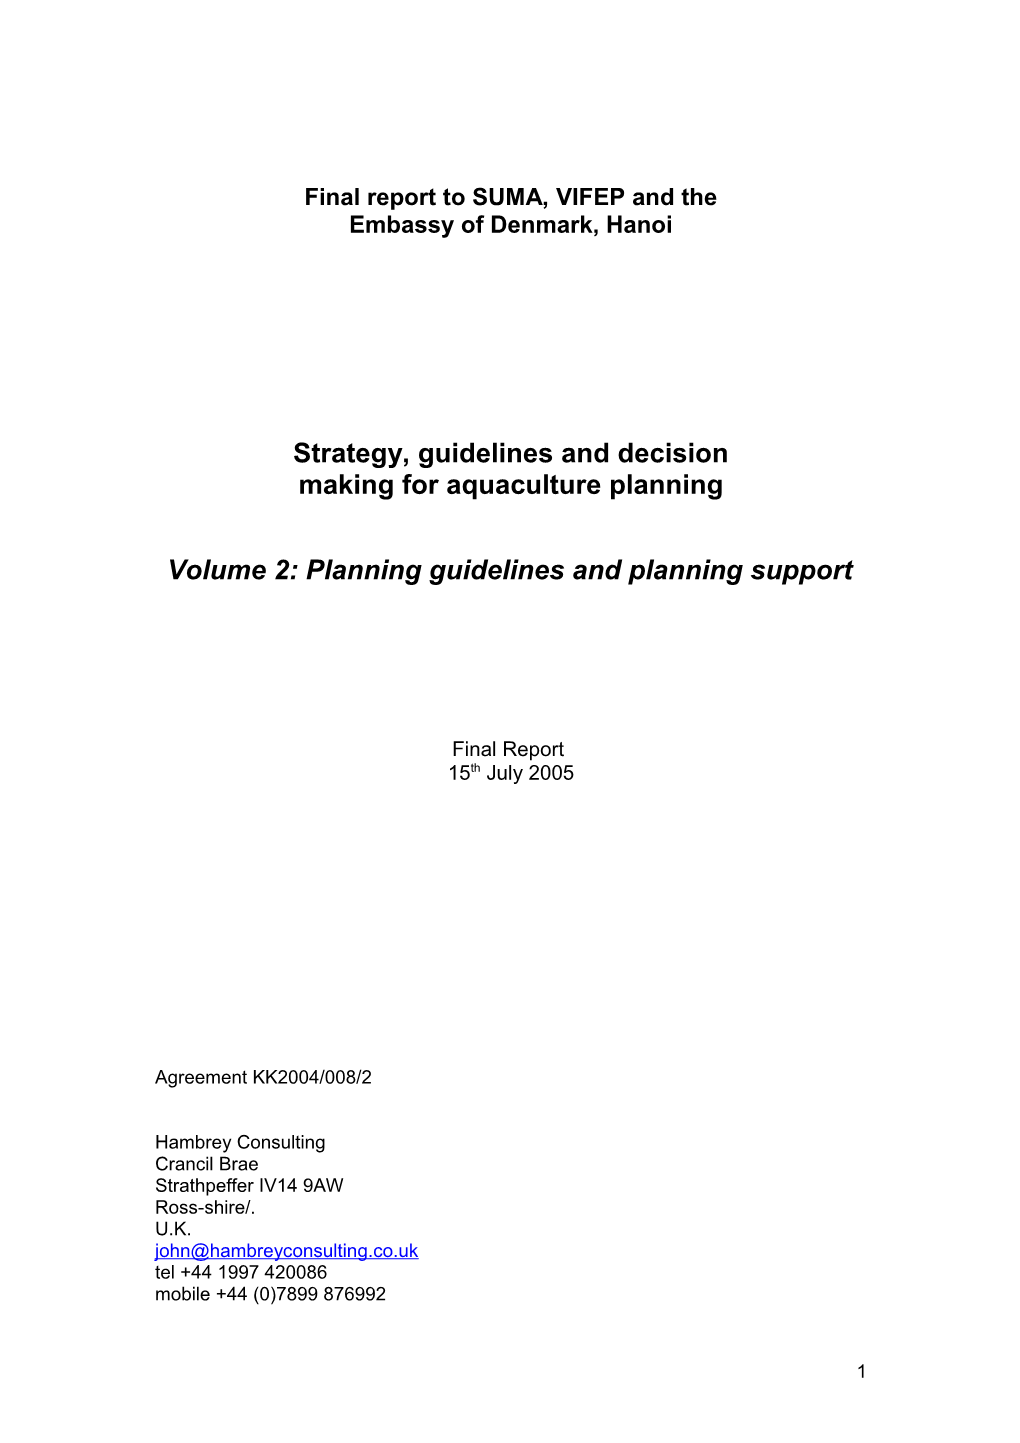 1 Part 1: Planning Guidelines and Planning Support